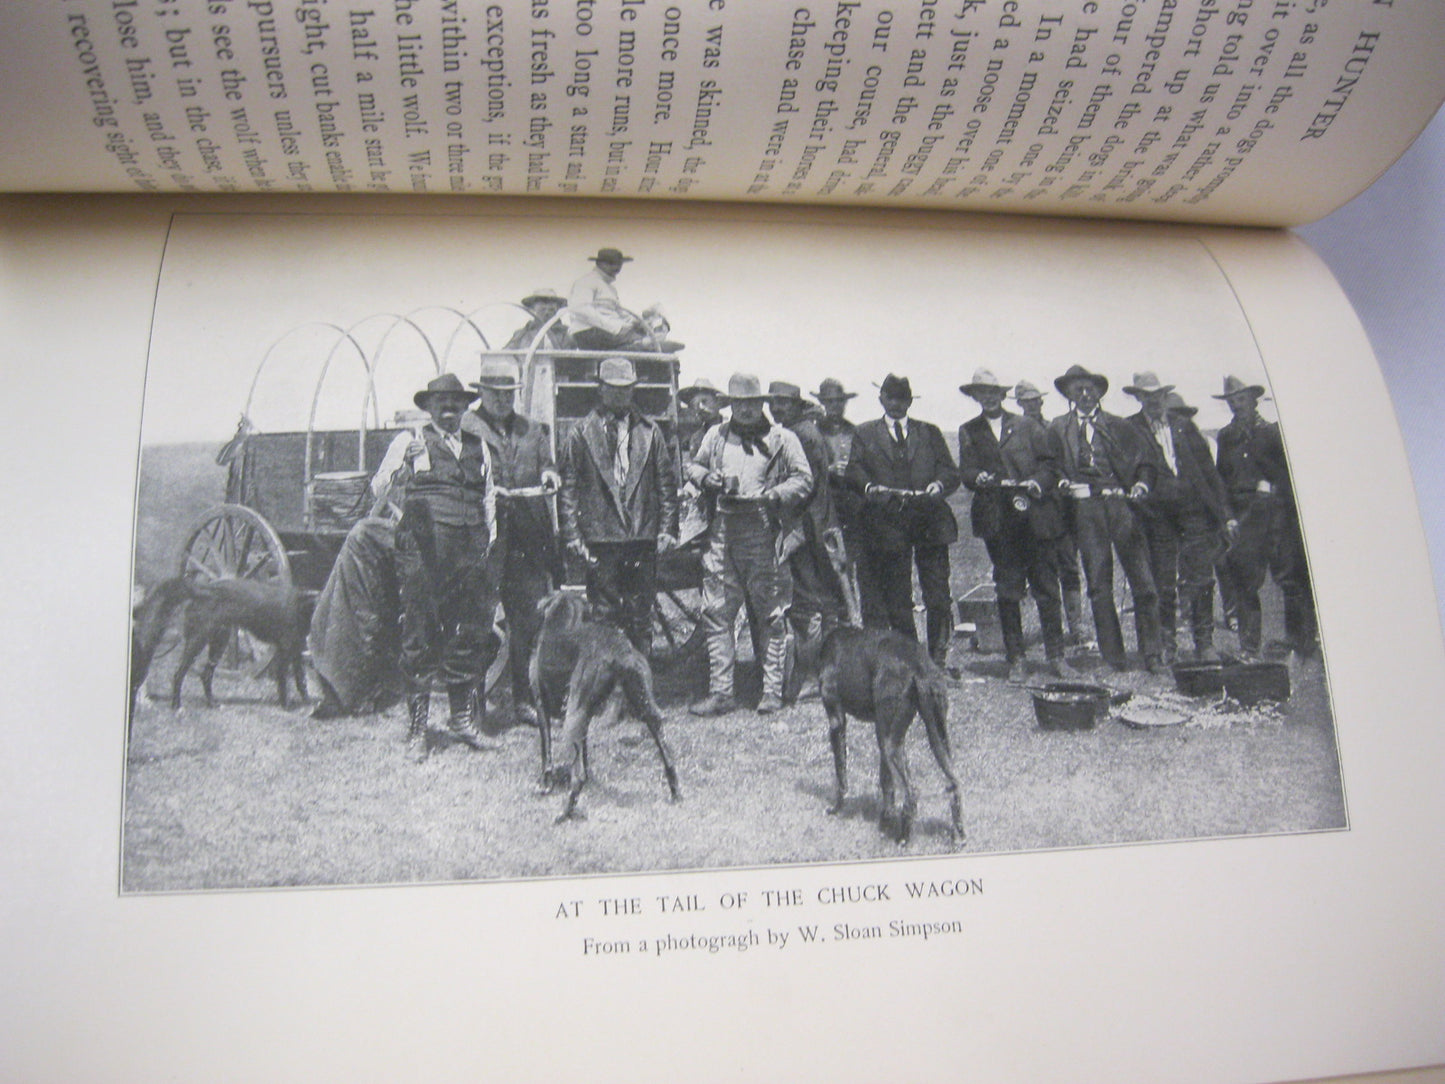 Outdoor Pastimes of an American Hunter by Theodore Roosevelt